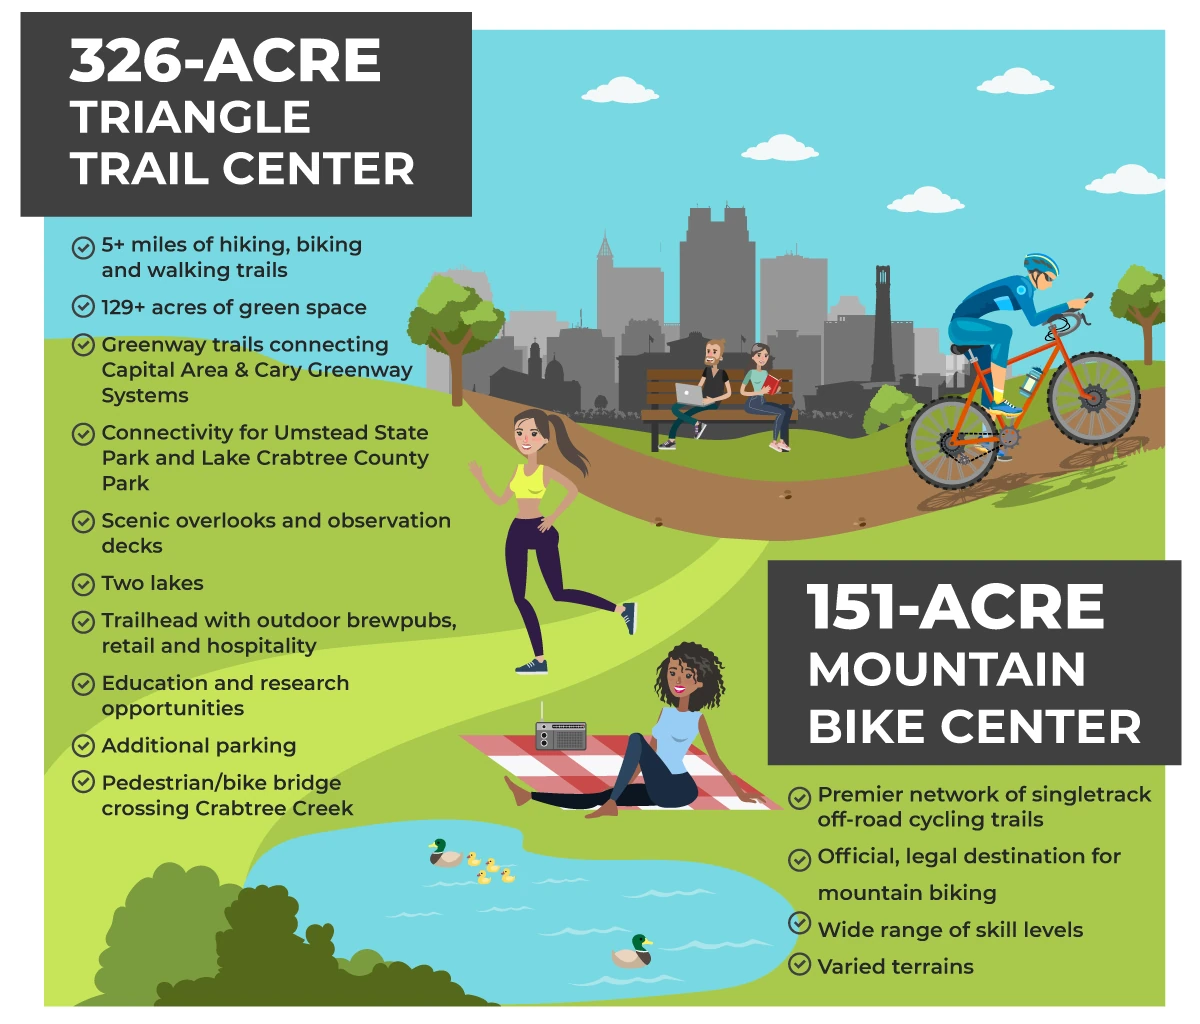 Infographic of Triangle Trail Center